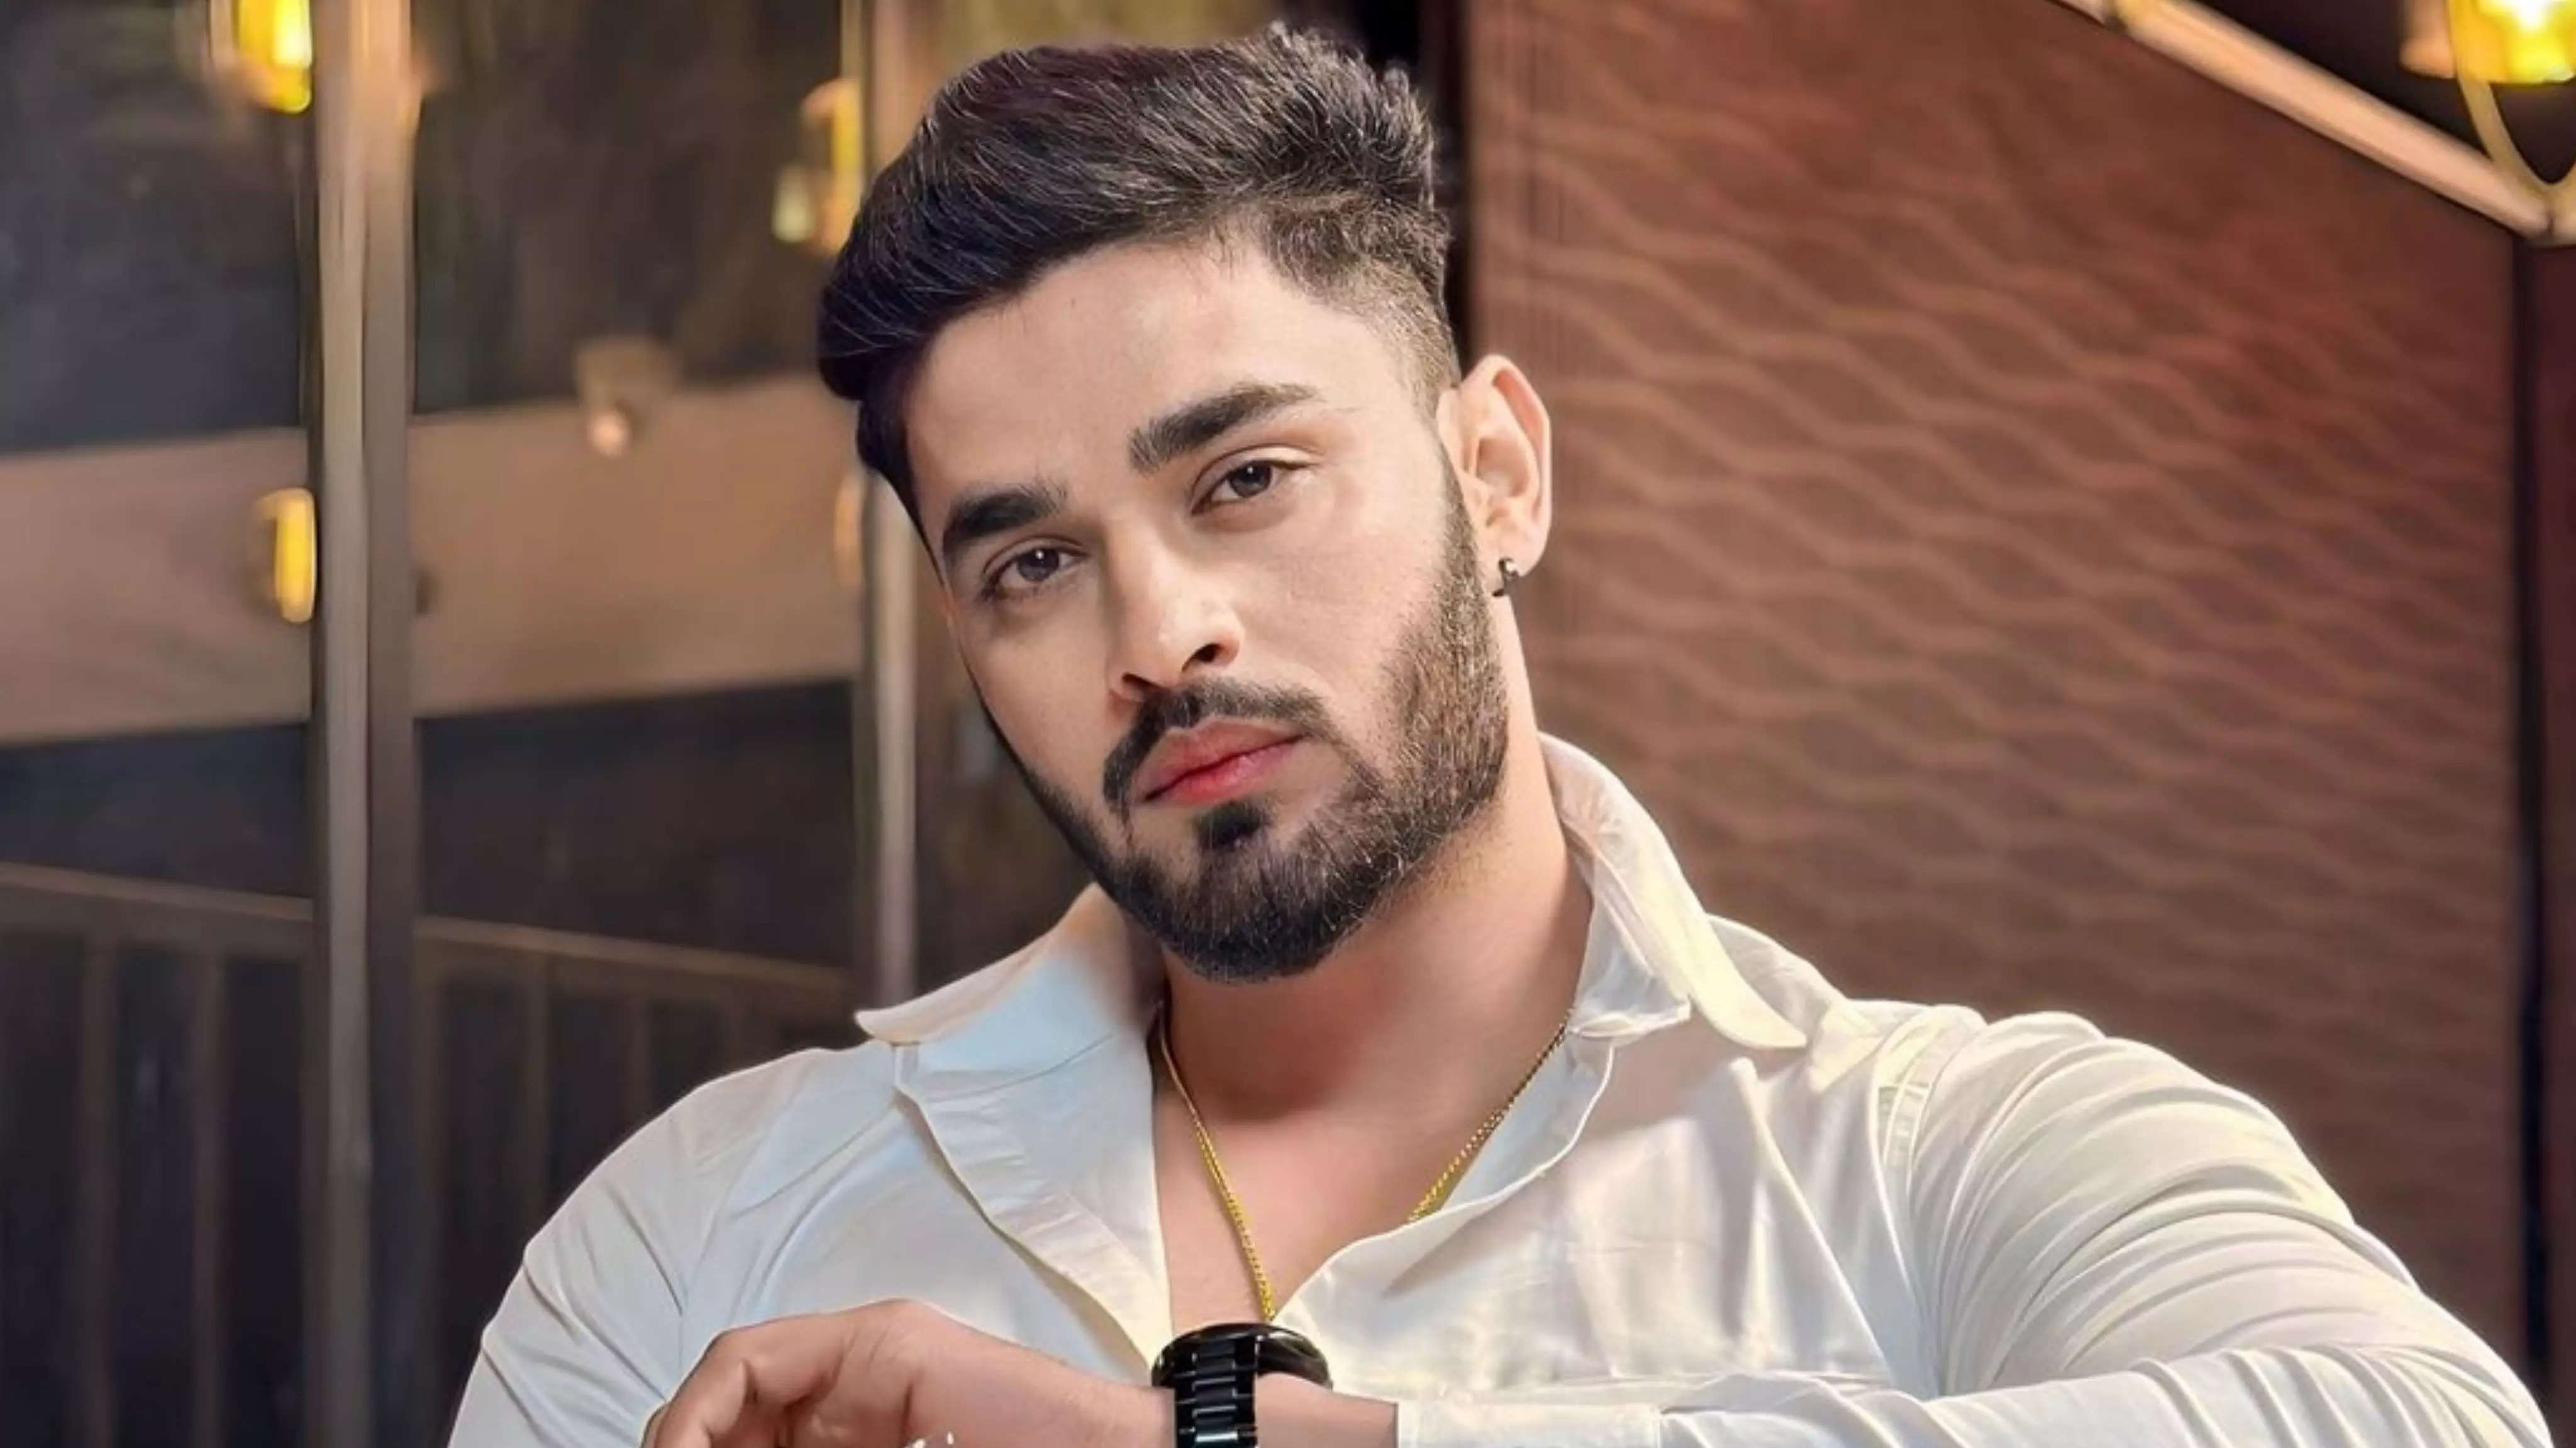 Exclusive: Splitsvilla X5 fame Arbaz Patel on his engagement rumours; says 'I am in a relationship but not engaged or married'